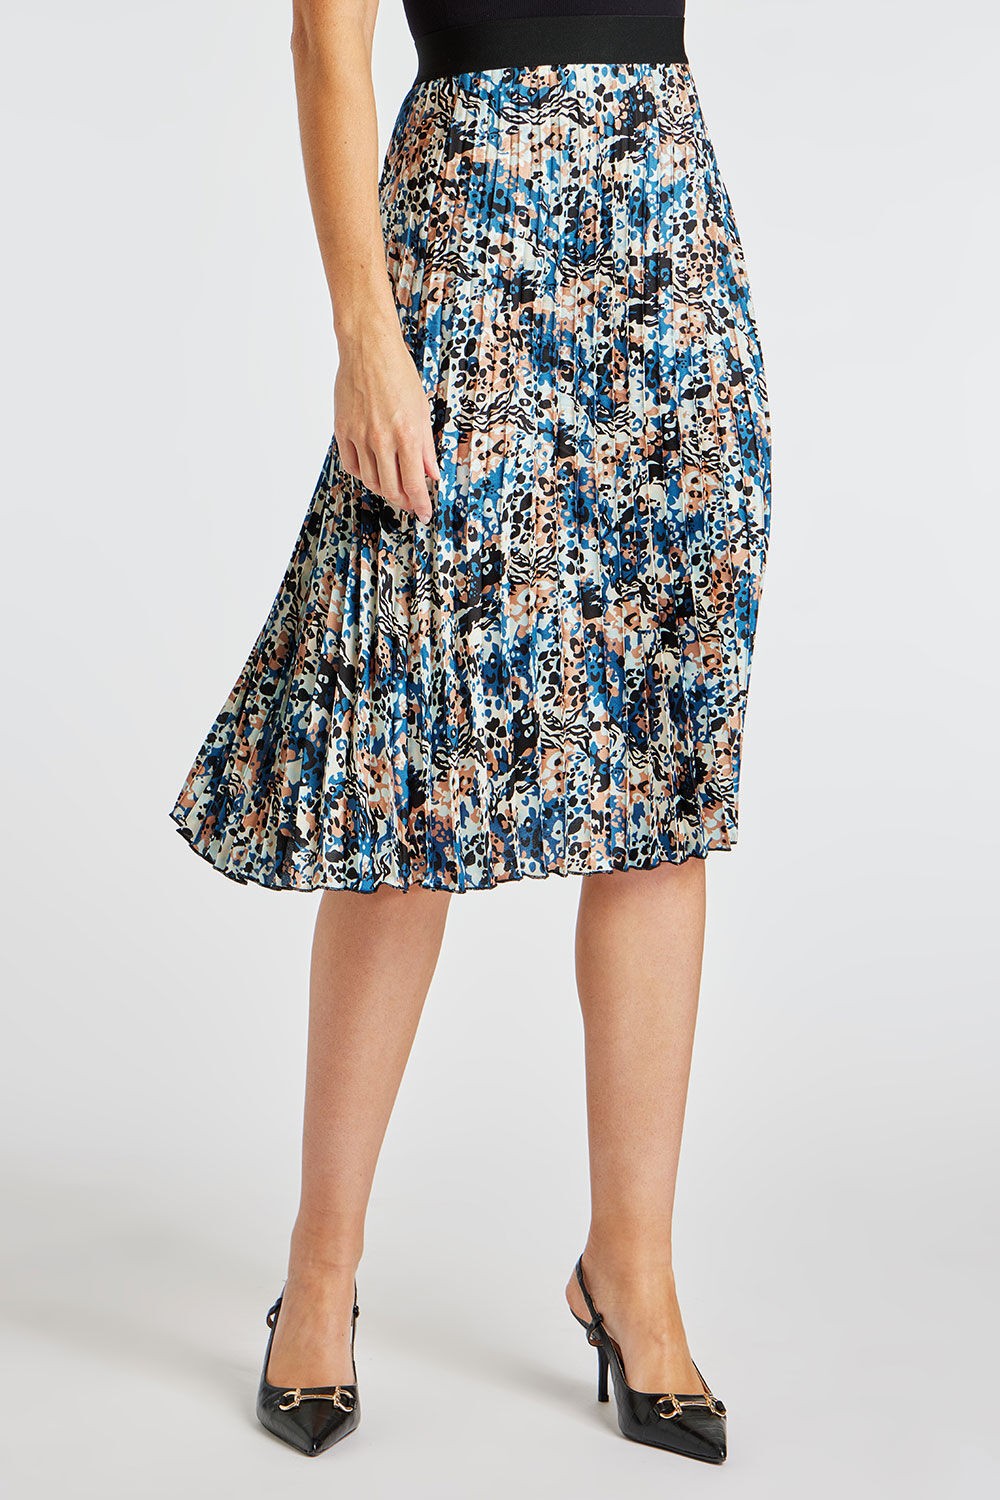 Bonmarche Brown Animal Patchwork Print Elasticated Pleated Skirt, Size: 22